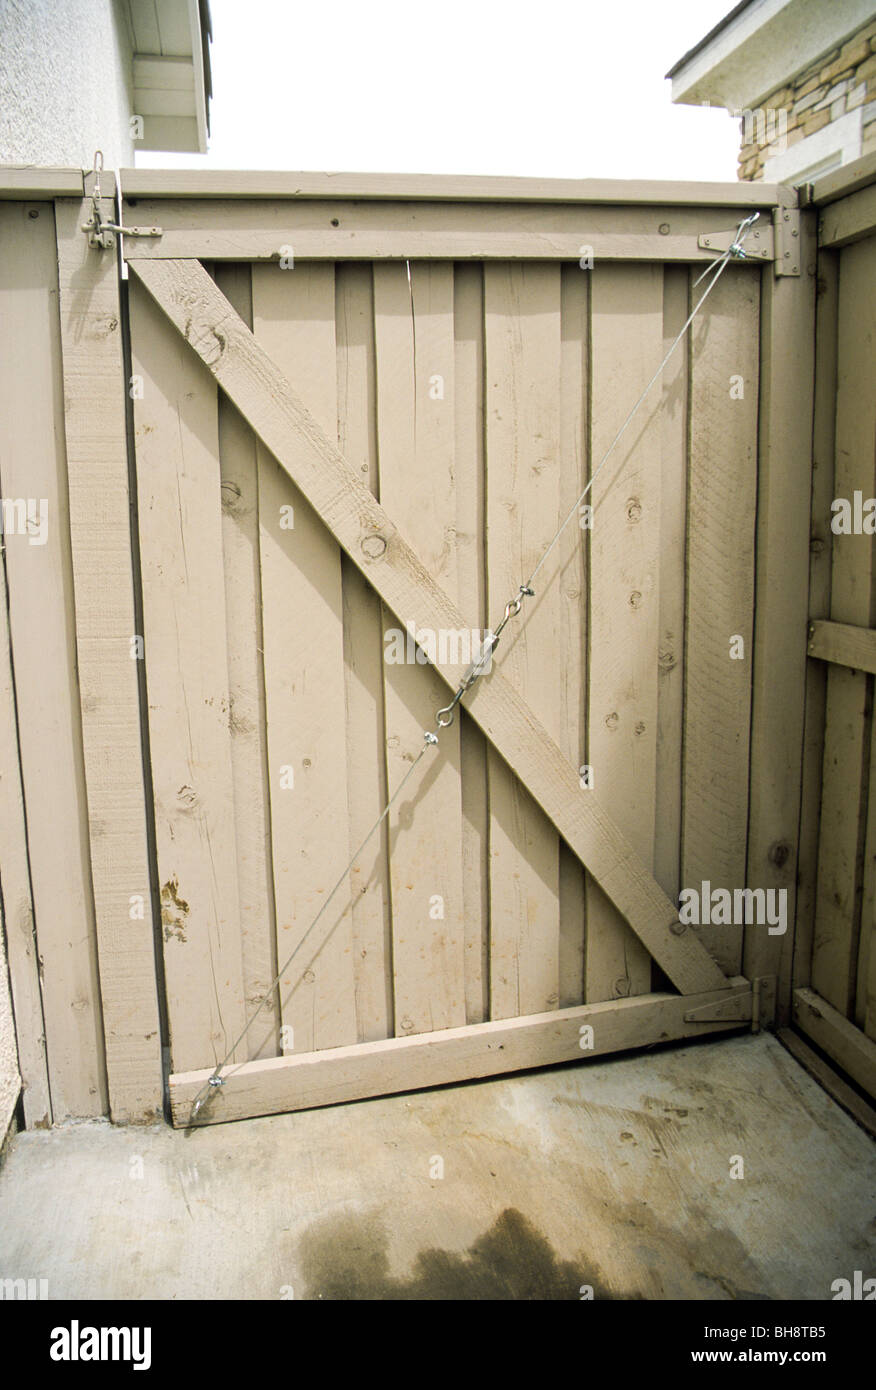 gate door closure diagonal support cable Stock Photo